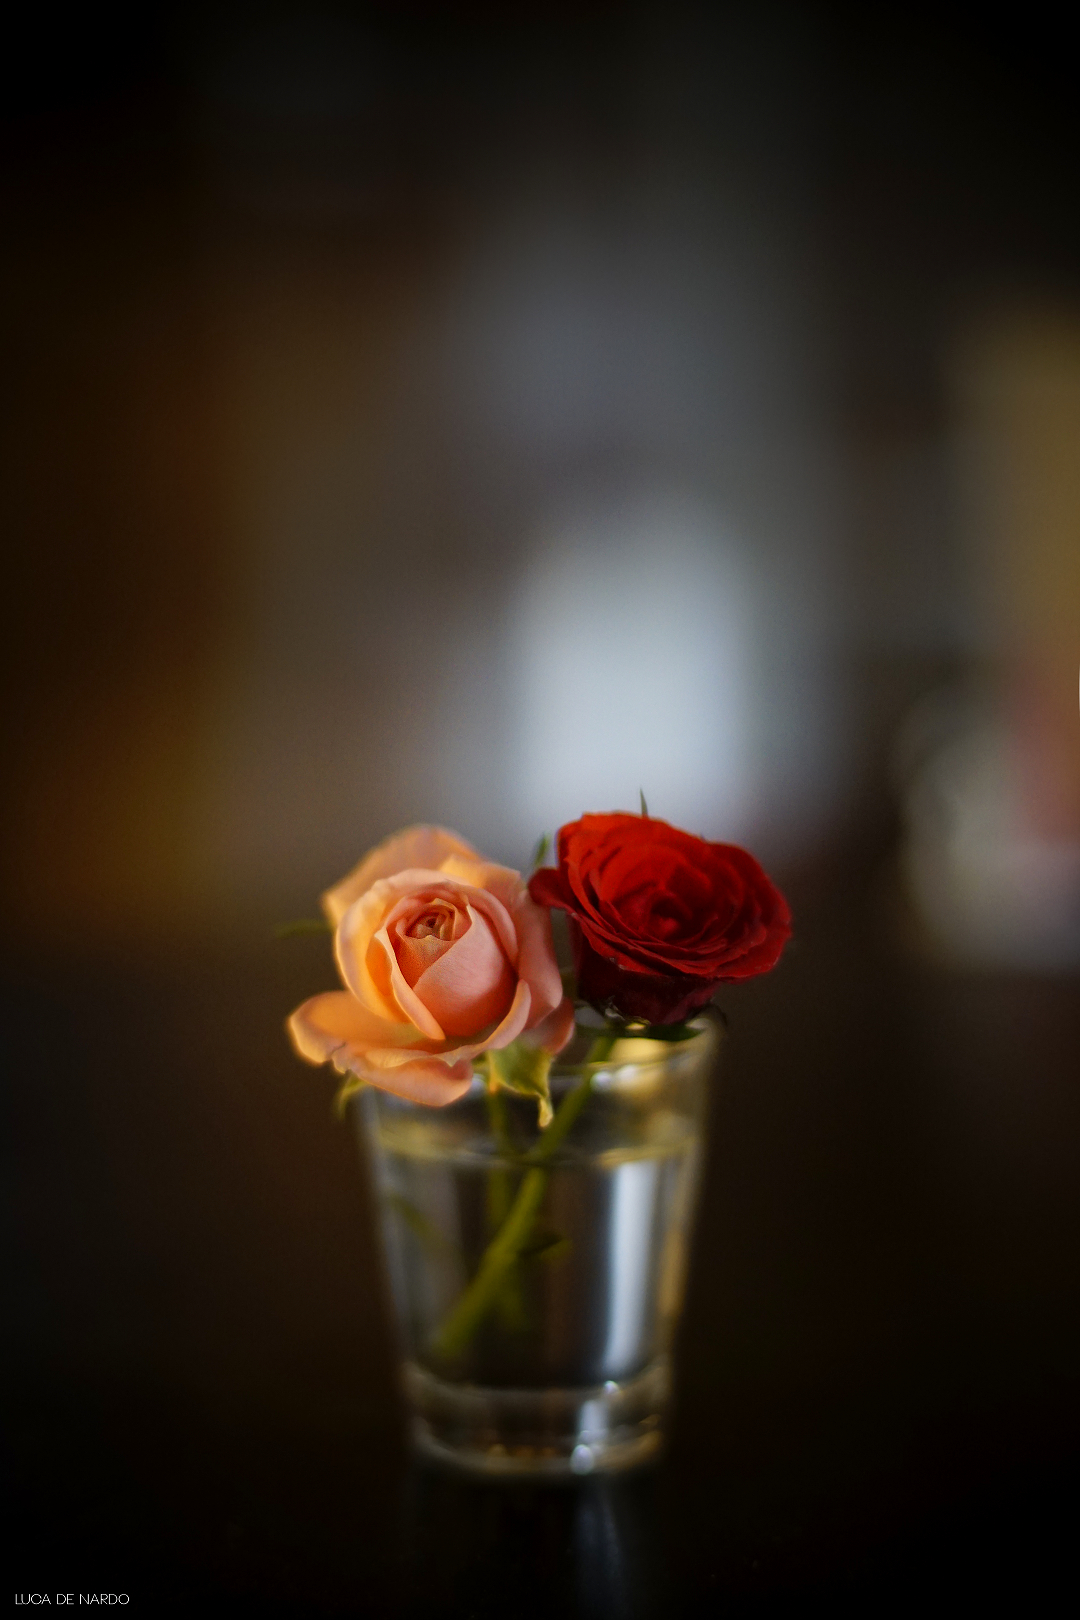 2 ROSES TOGETHER (Revuenon 55mm f1.2 - Sony A6000)...